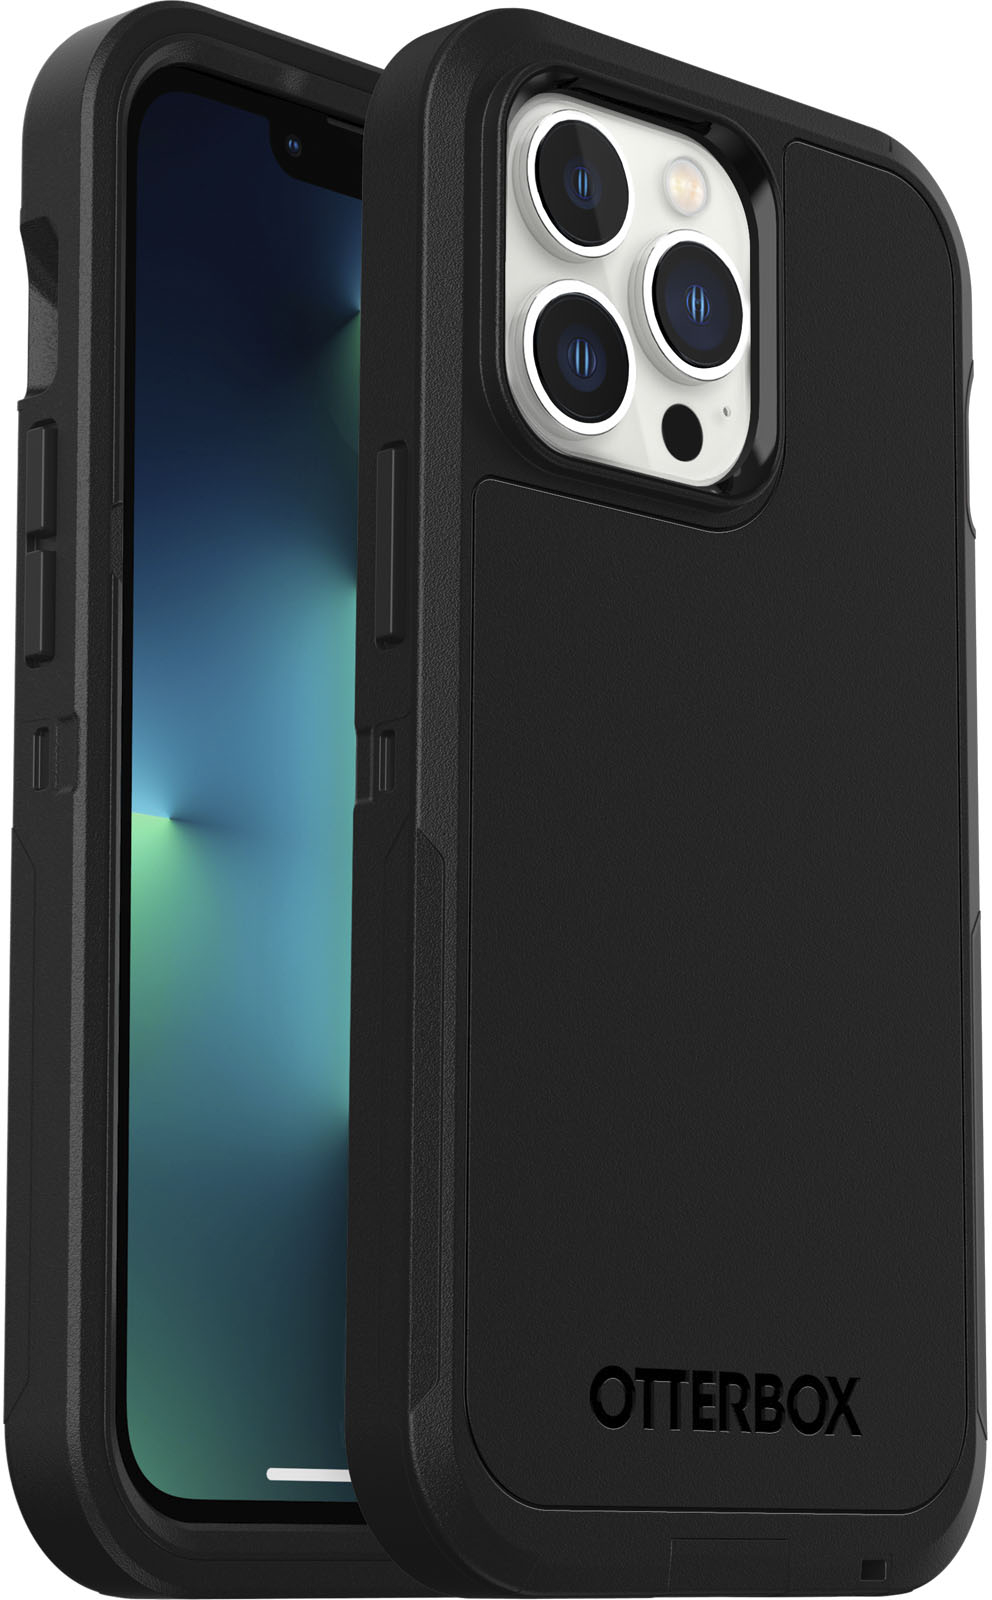 Angle View: OtterBox - Defender Series Pro XT Hard Shell for Apple iPhone 13 Pro - Black